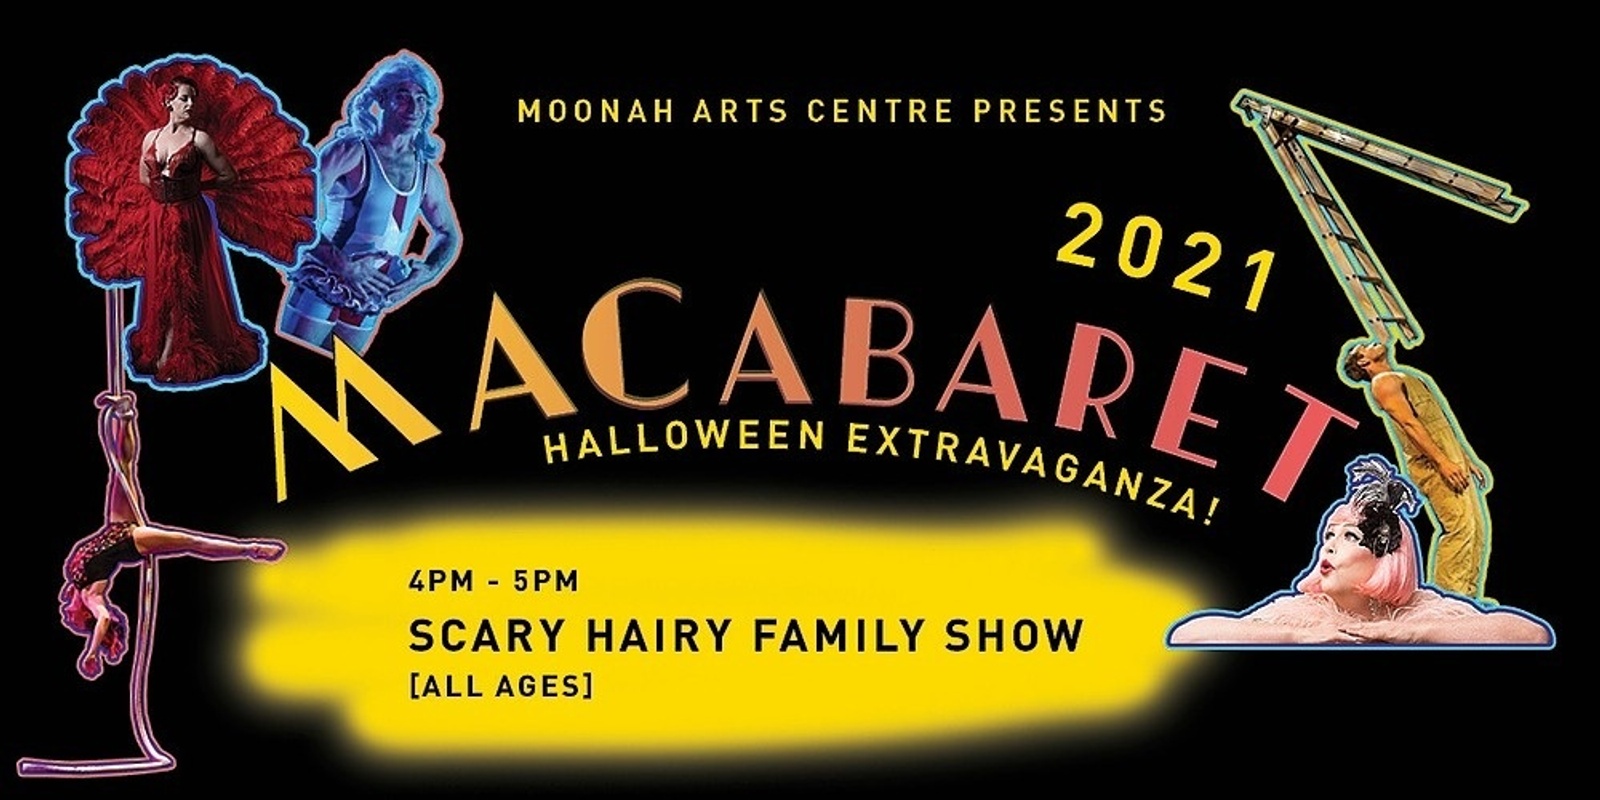 MACabaret Scary Hairy Family Show 